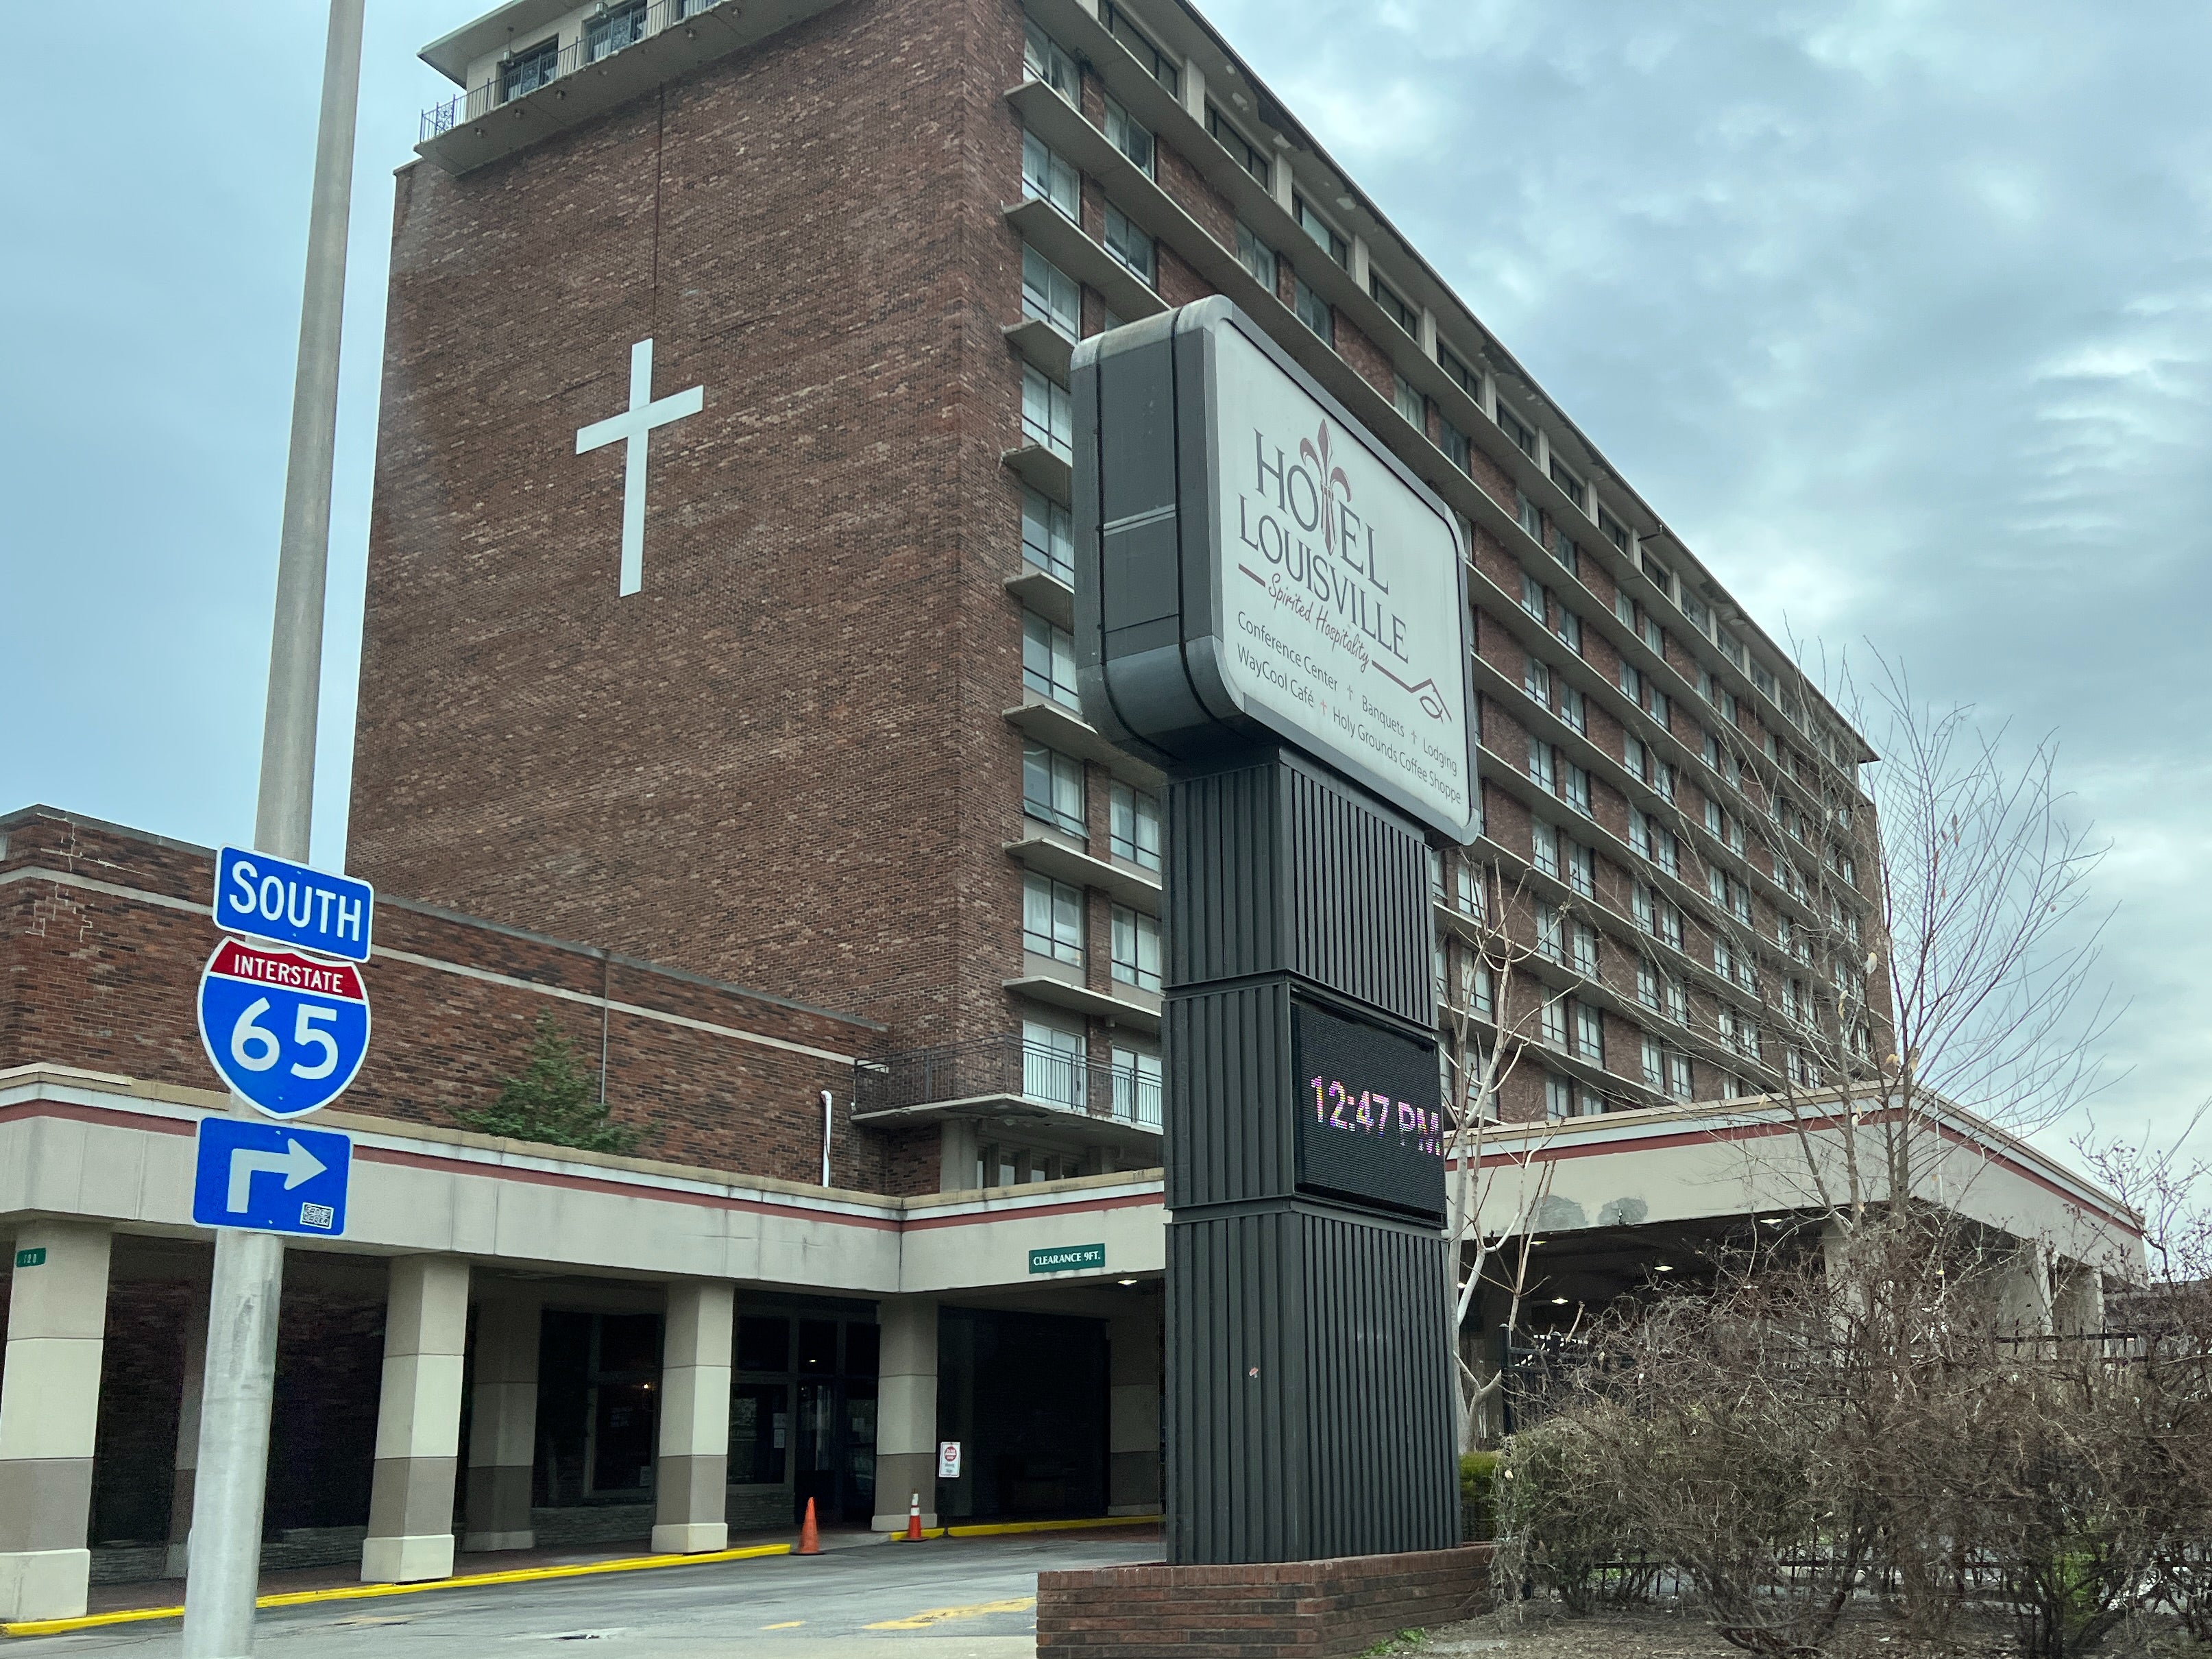 Spiritual stay: Hotel Louisville, where guests and local people mingle